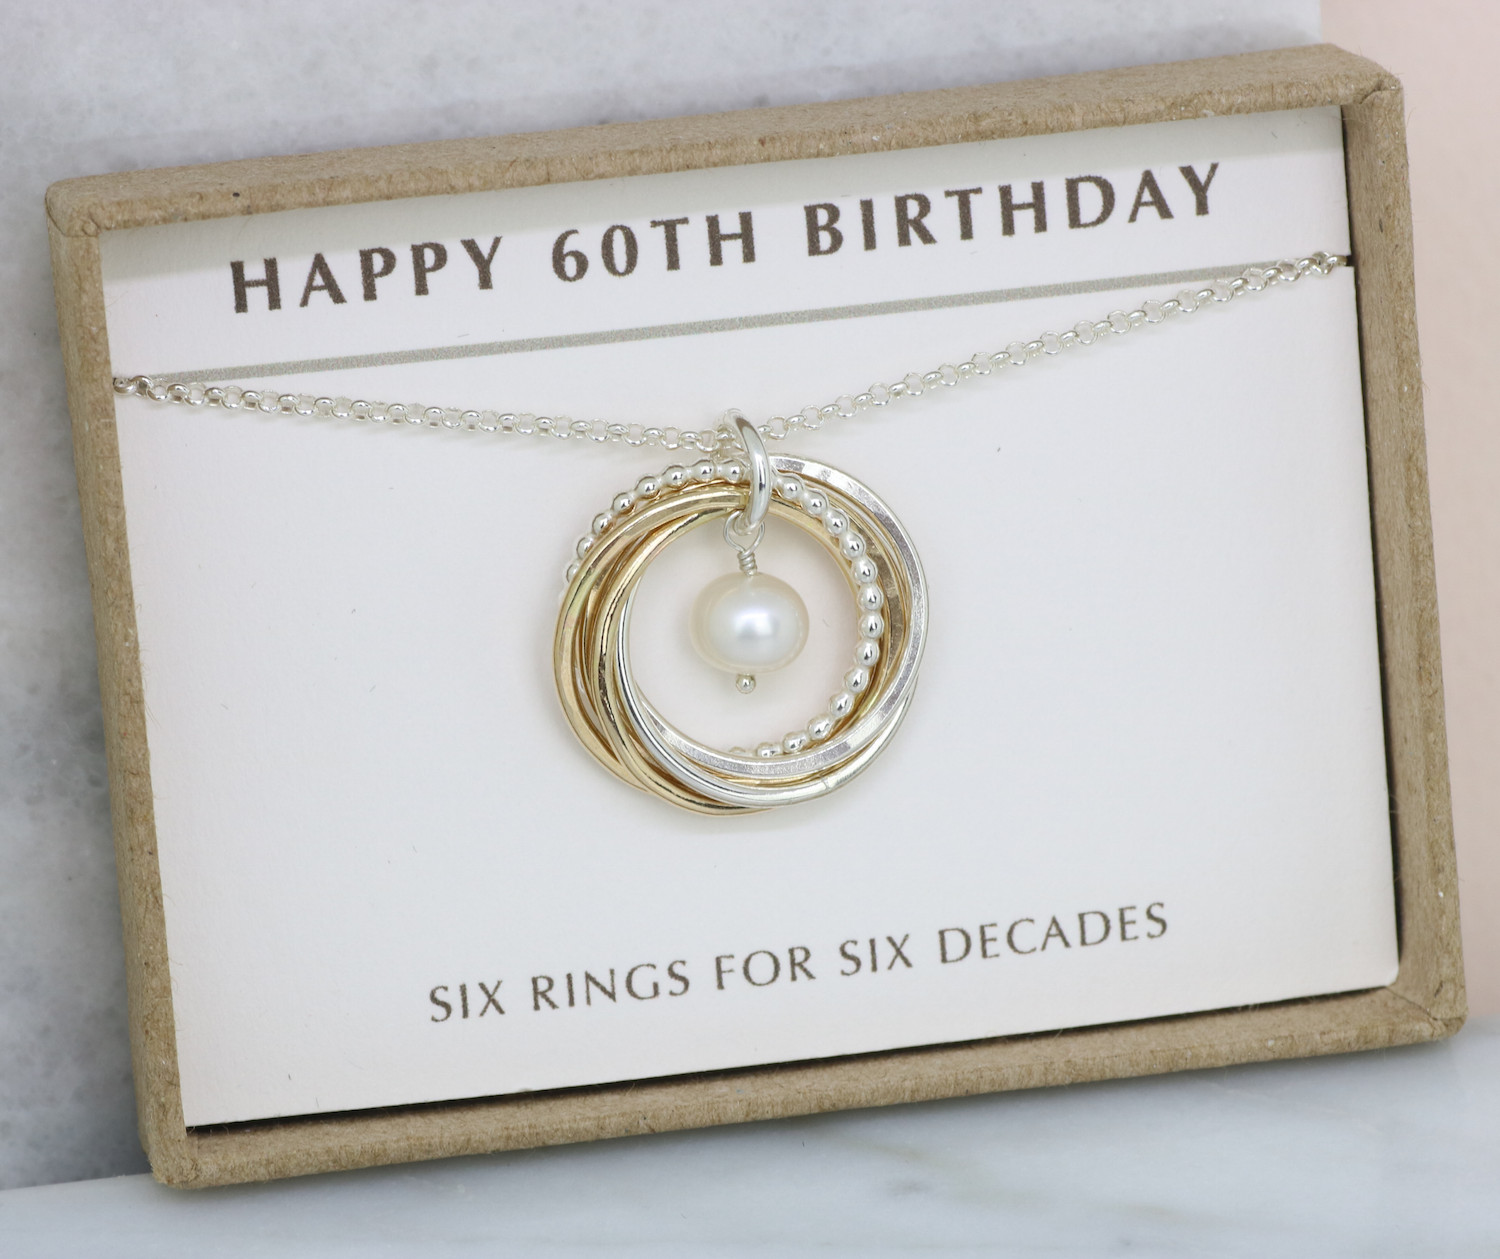 60Th Birthday Gift Ideas For.Women
 60th Birthday Necklace with Birthstone